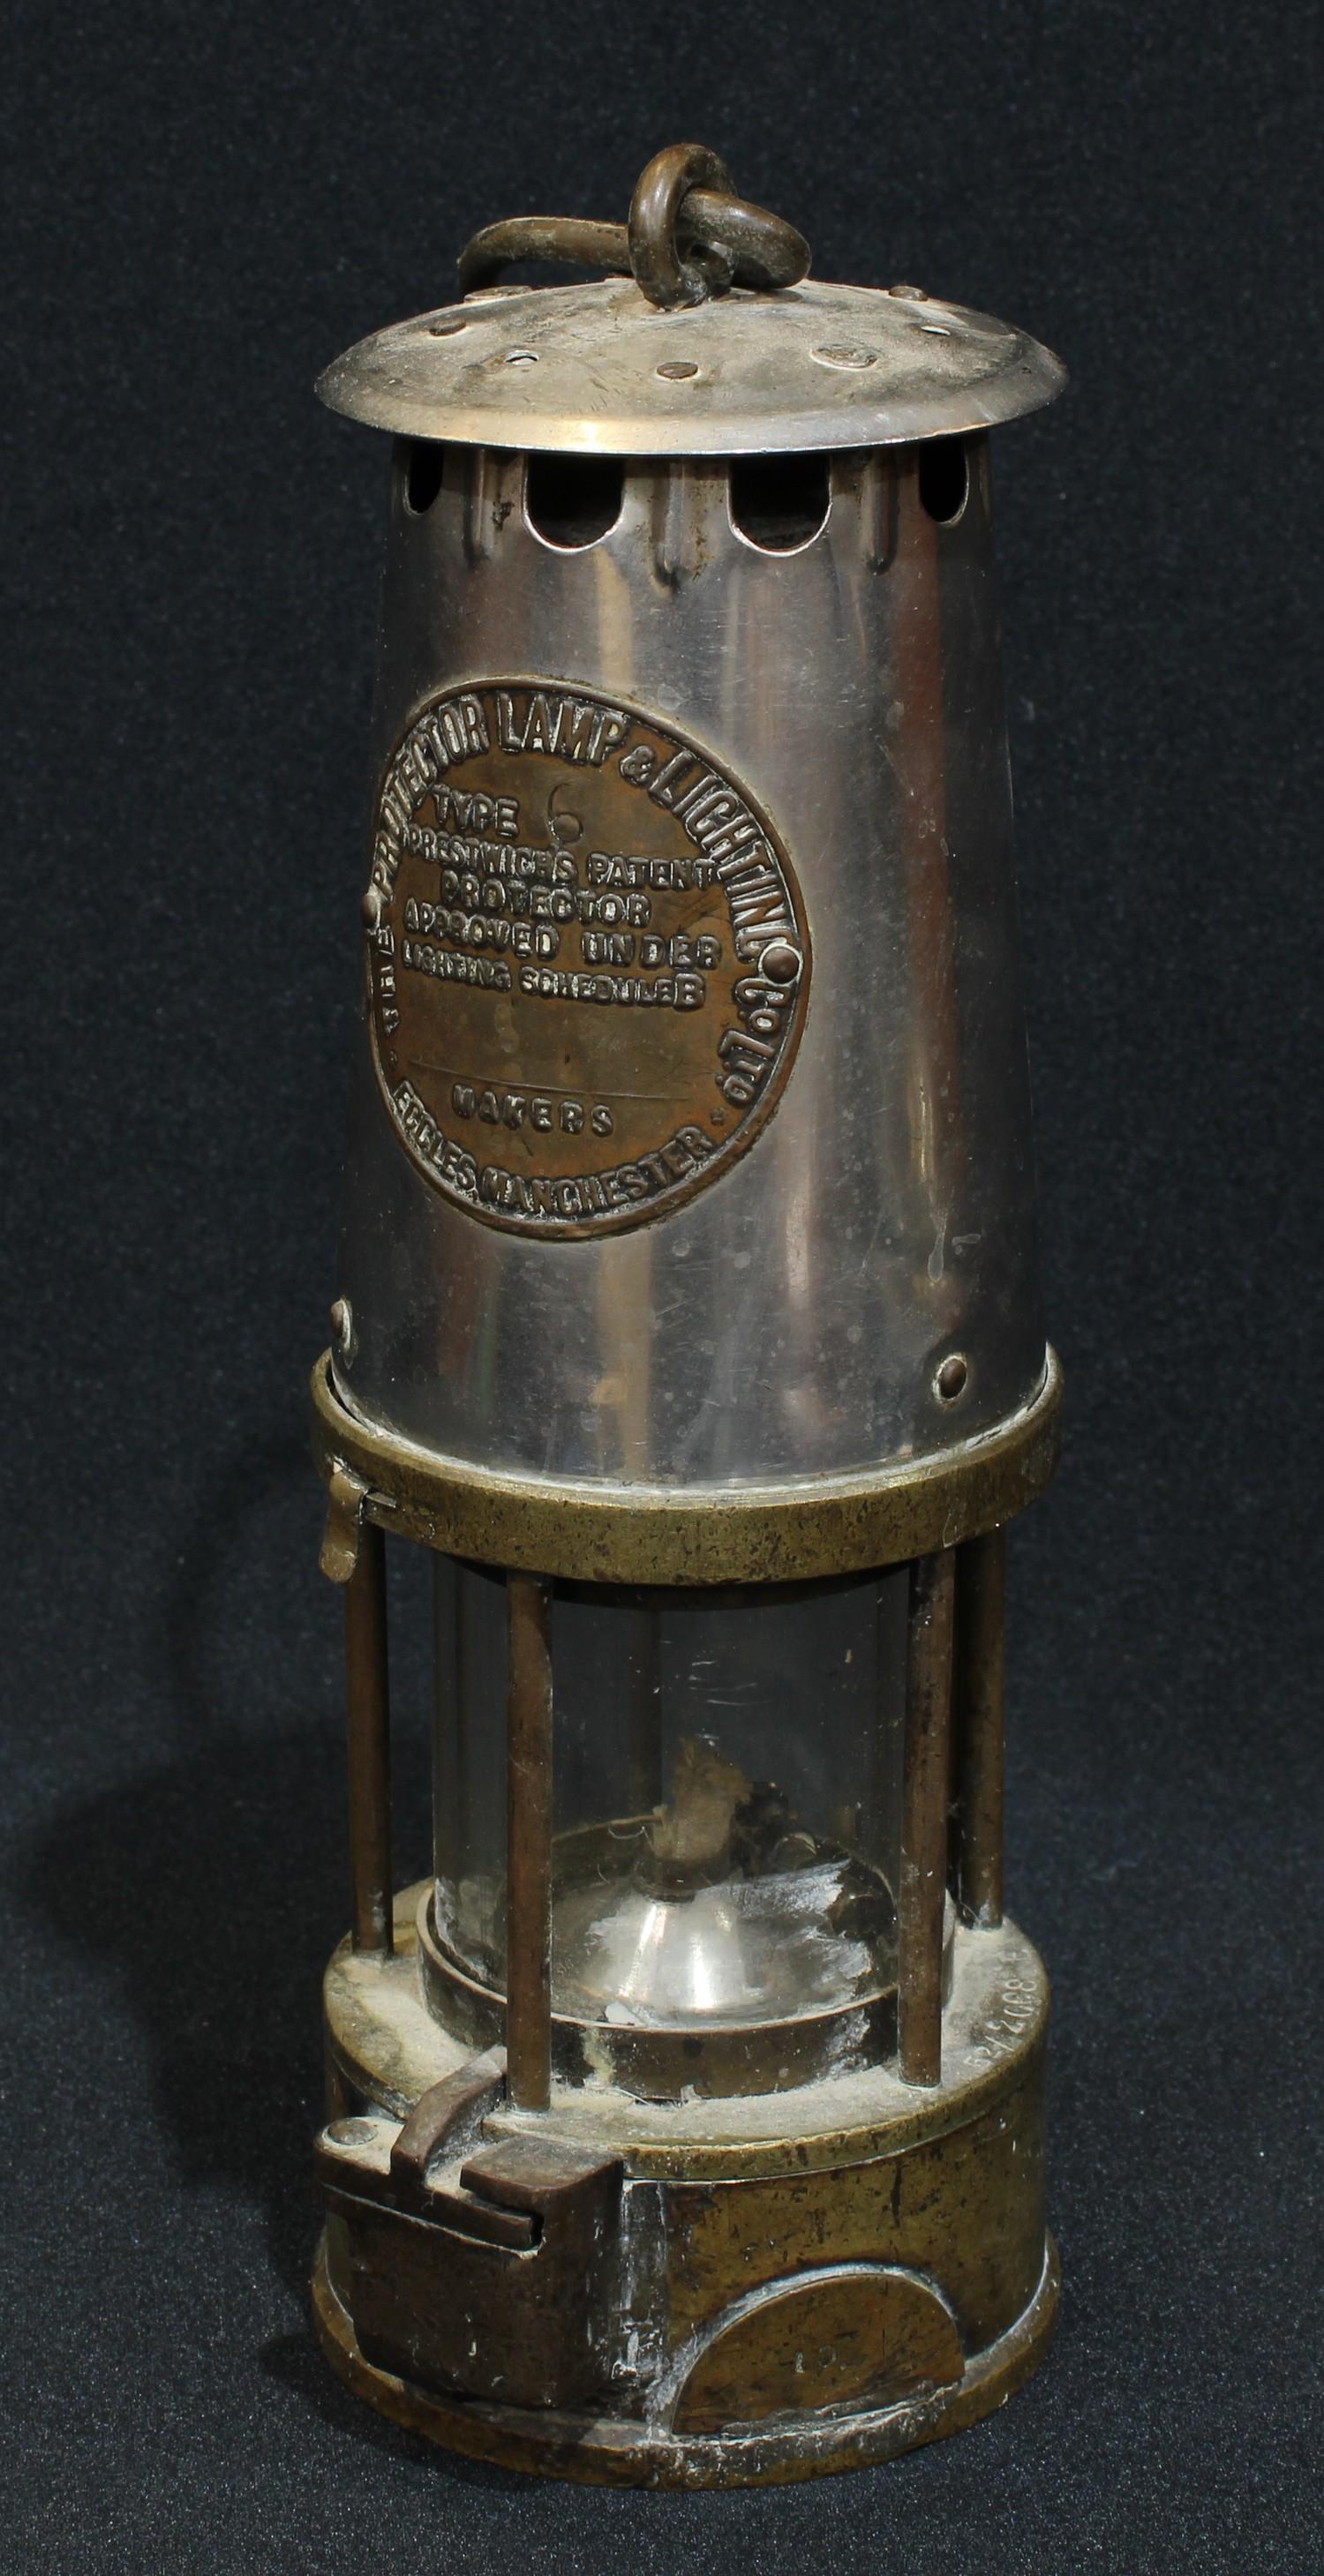 A miner's safety lamp, Protector Lamp and Lighting Co. Ltd., Eccles, Manchester, Type 6